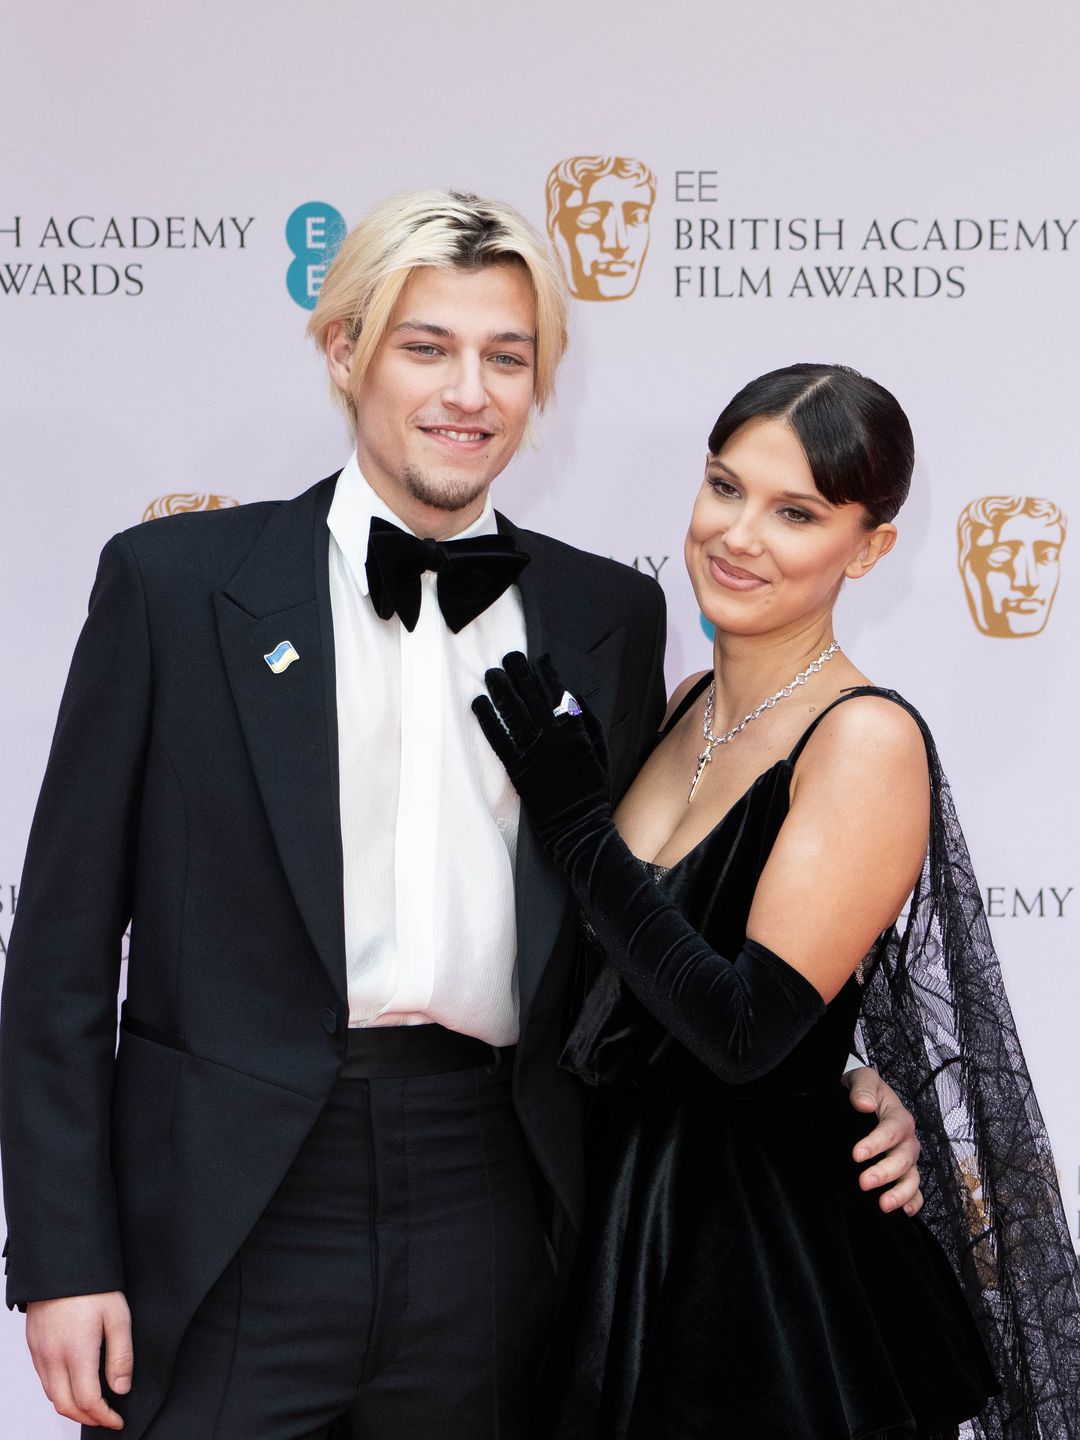 Jake Bongiovi  and Millie Bobby Brown attend the EE British Academy Film Awards 2022 at Royal Albert Hall on March 13, 2022 in London, England